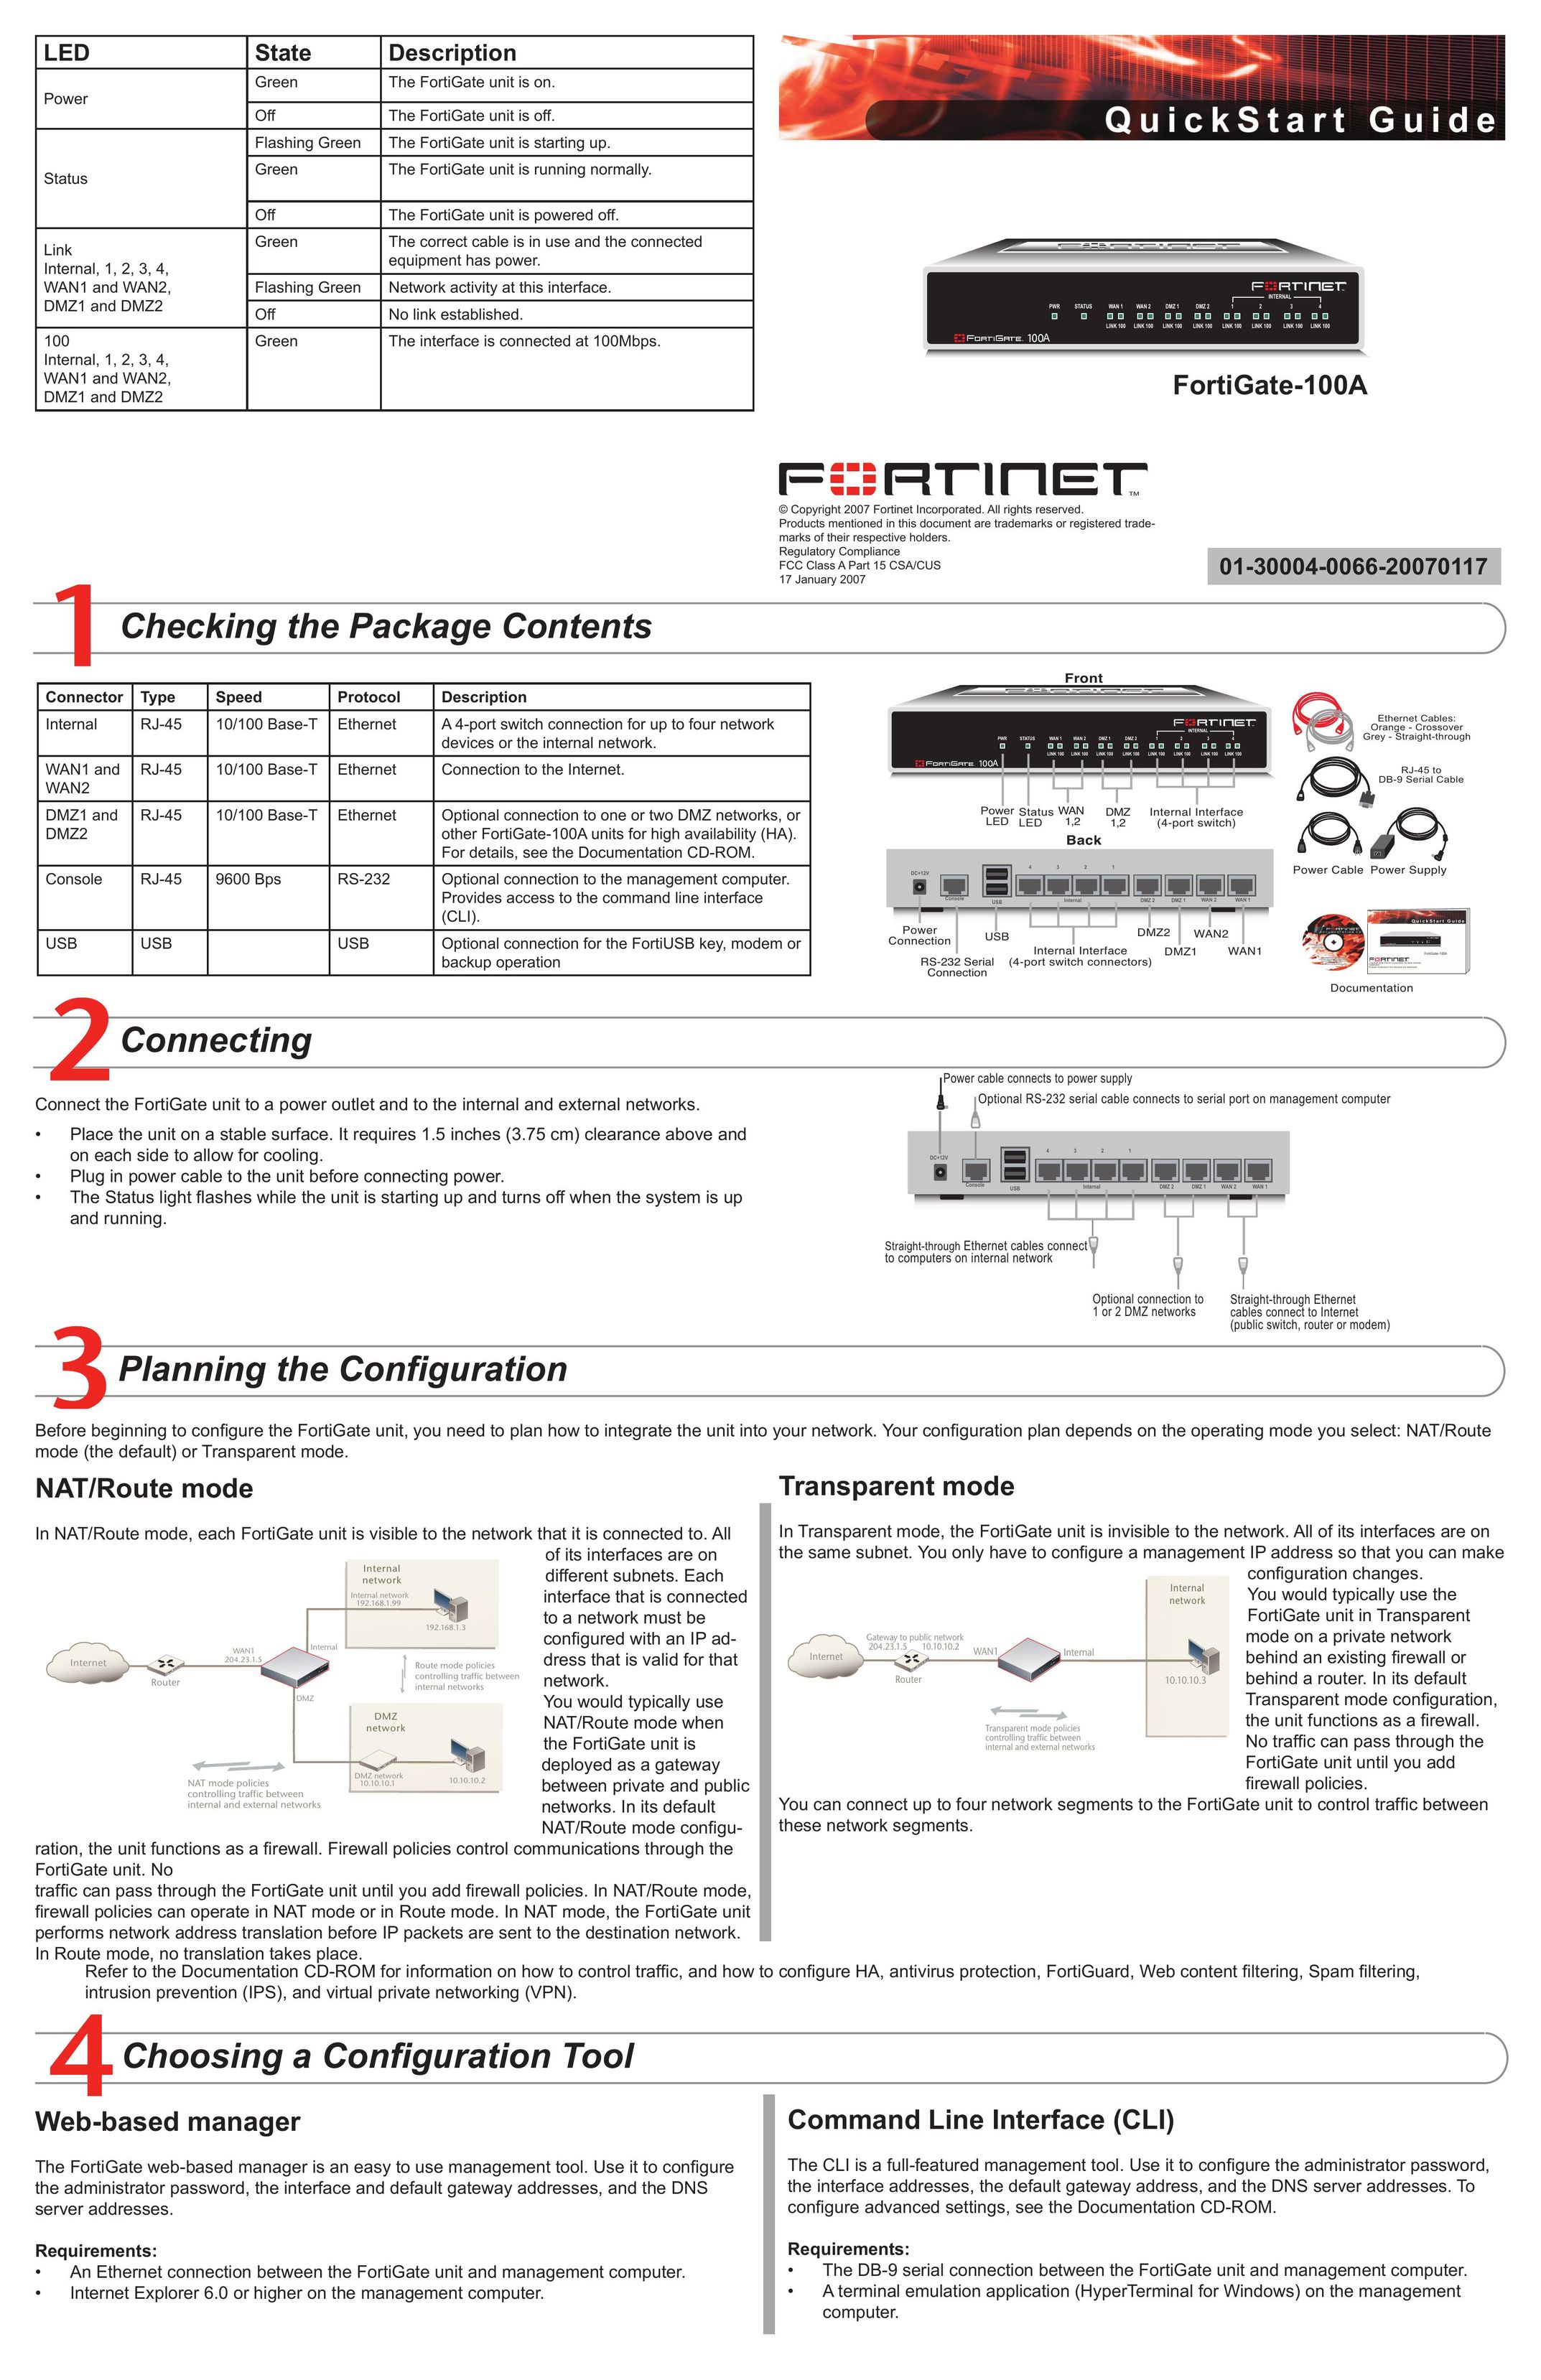 Fortinet 100A Network Router User Manual